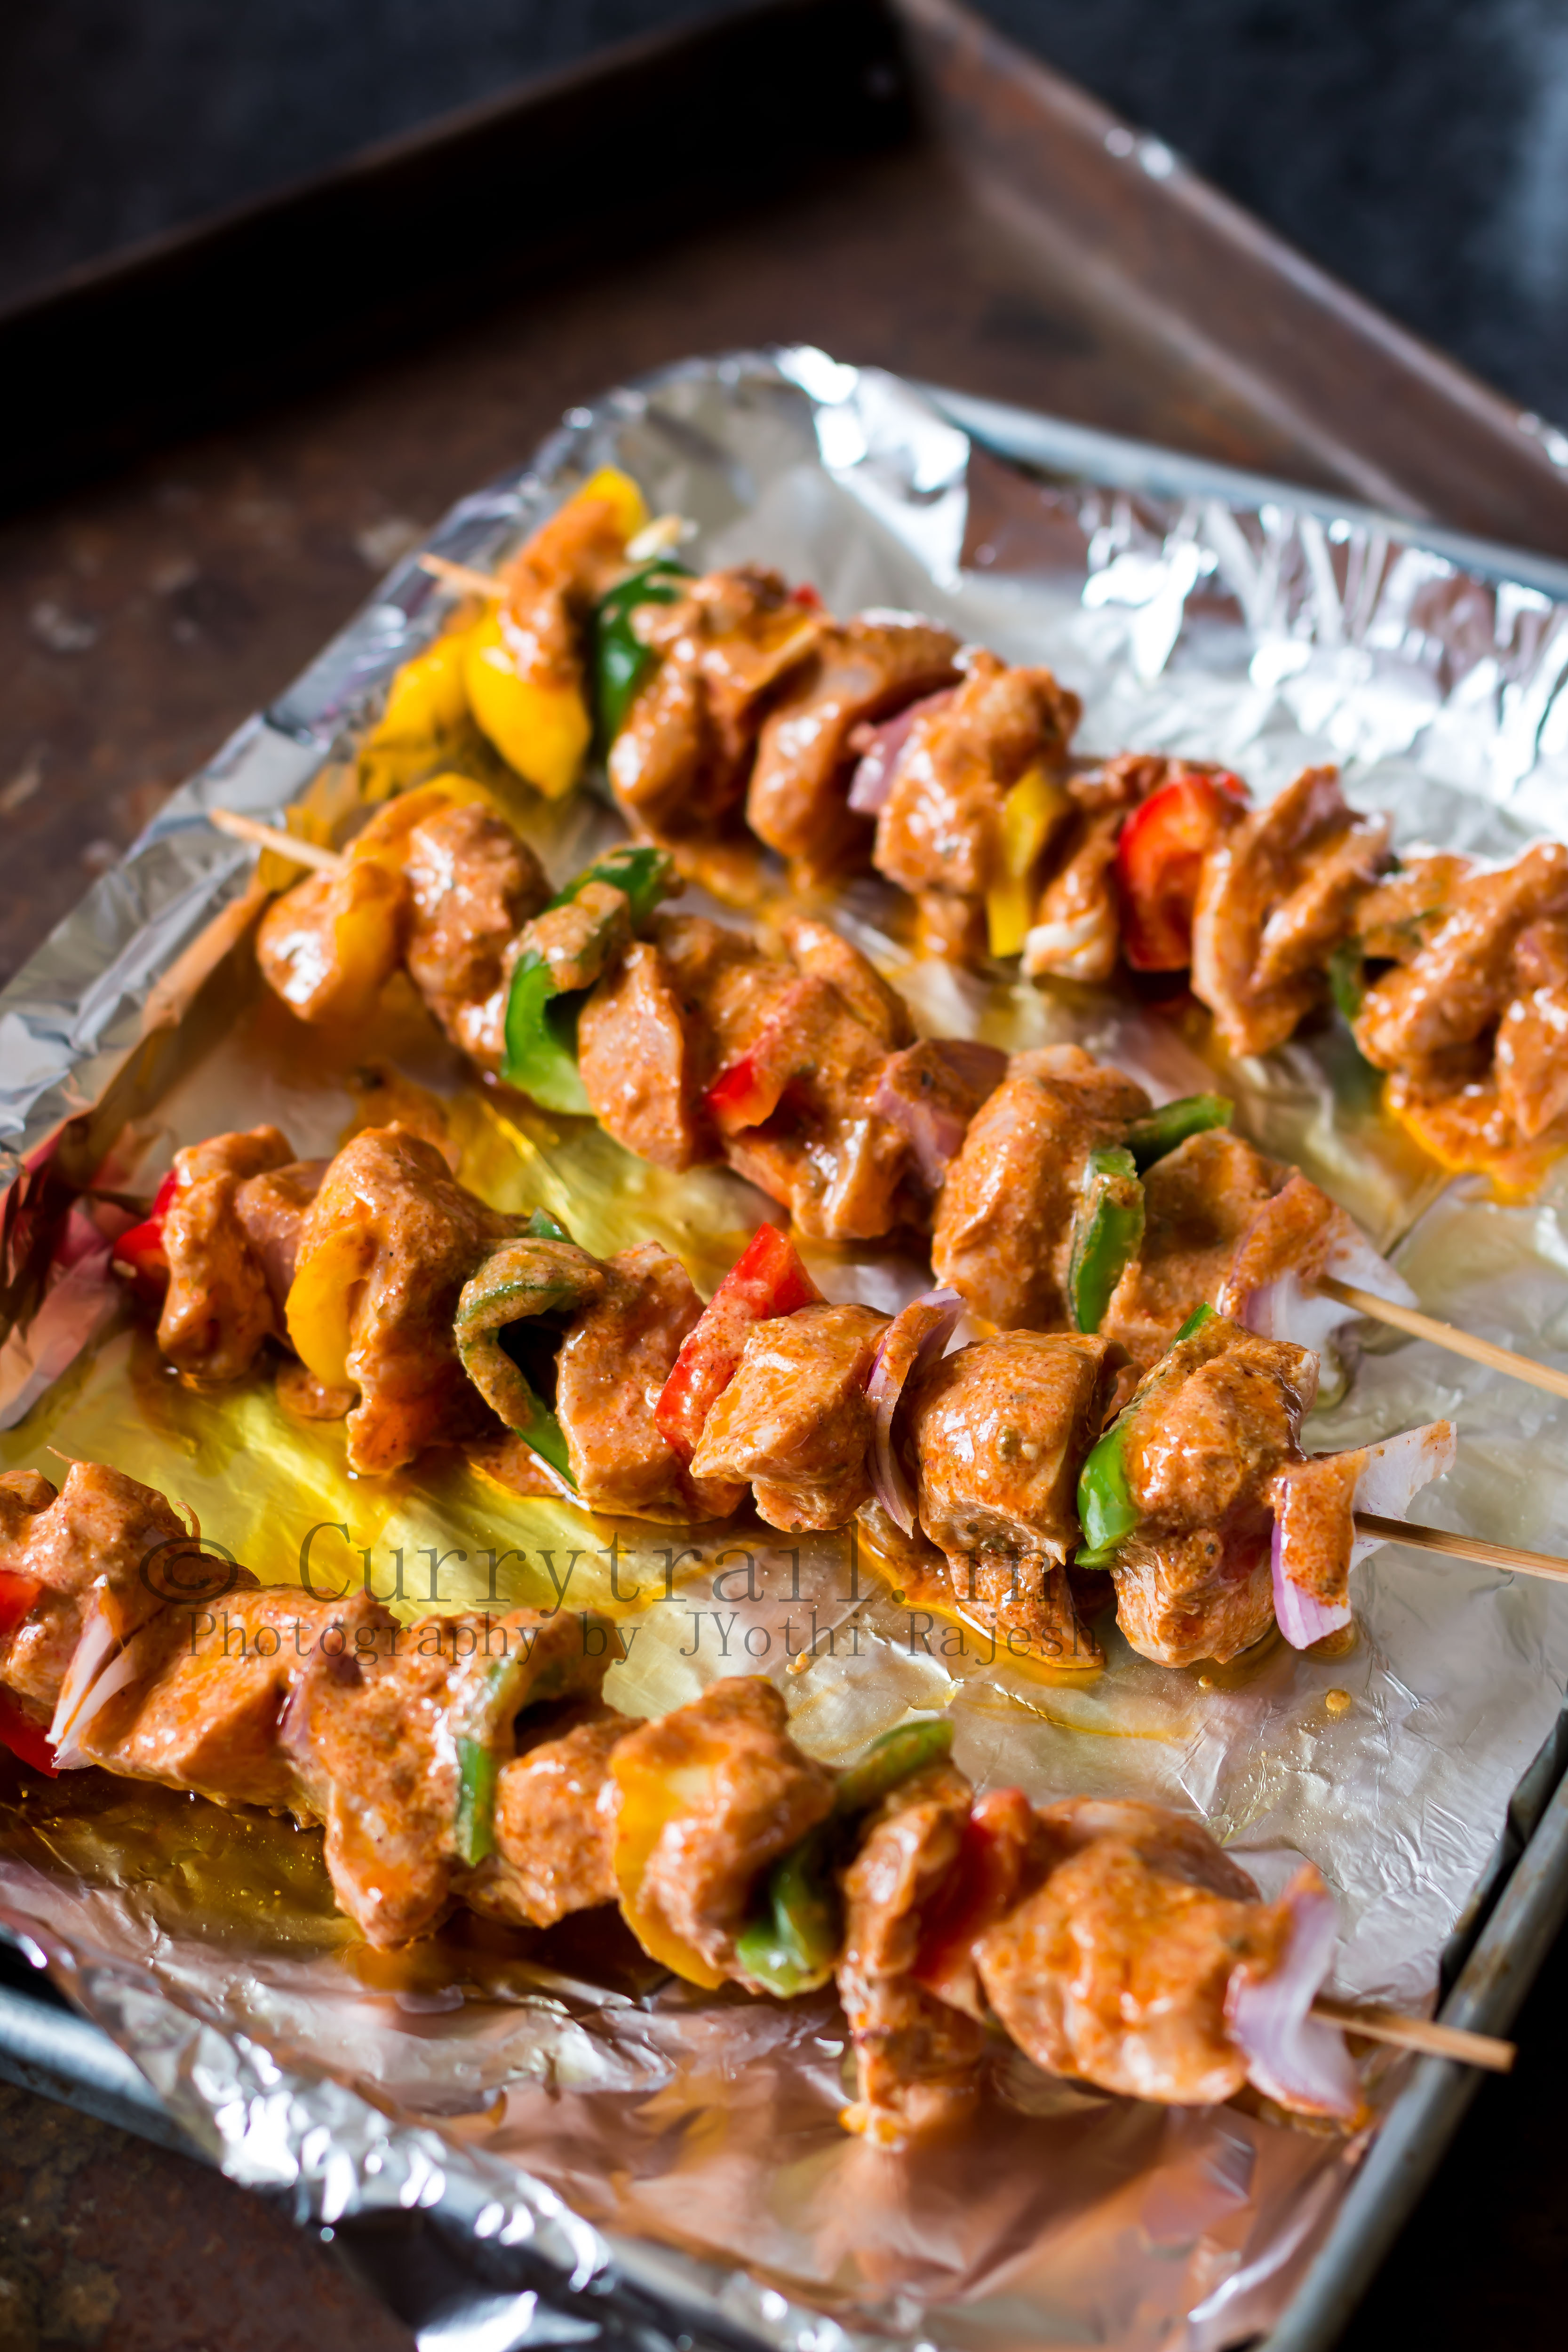 marinated chicken and veggies skewered on bamboo stick for shisk tawook